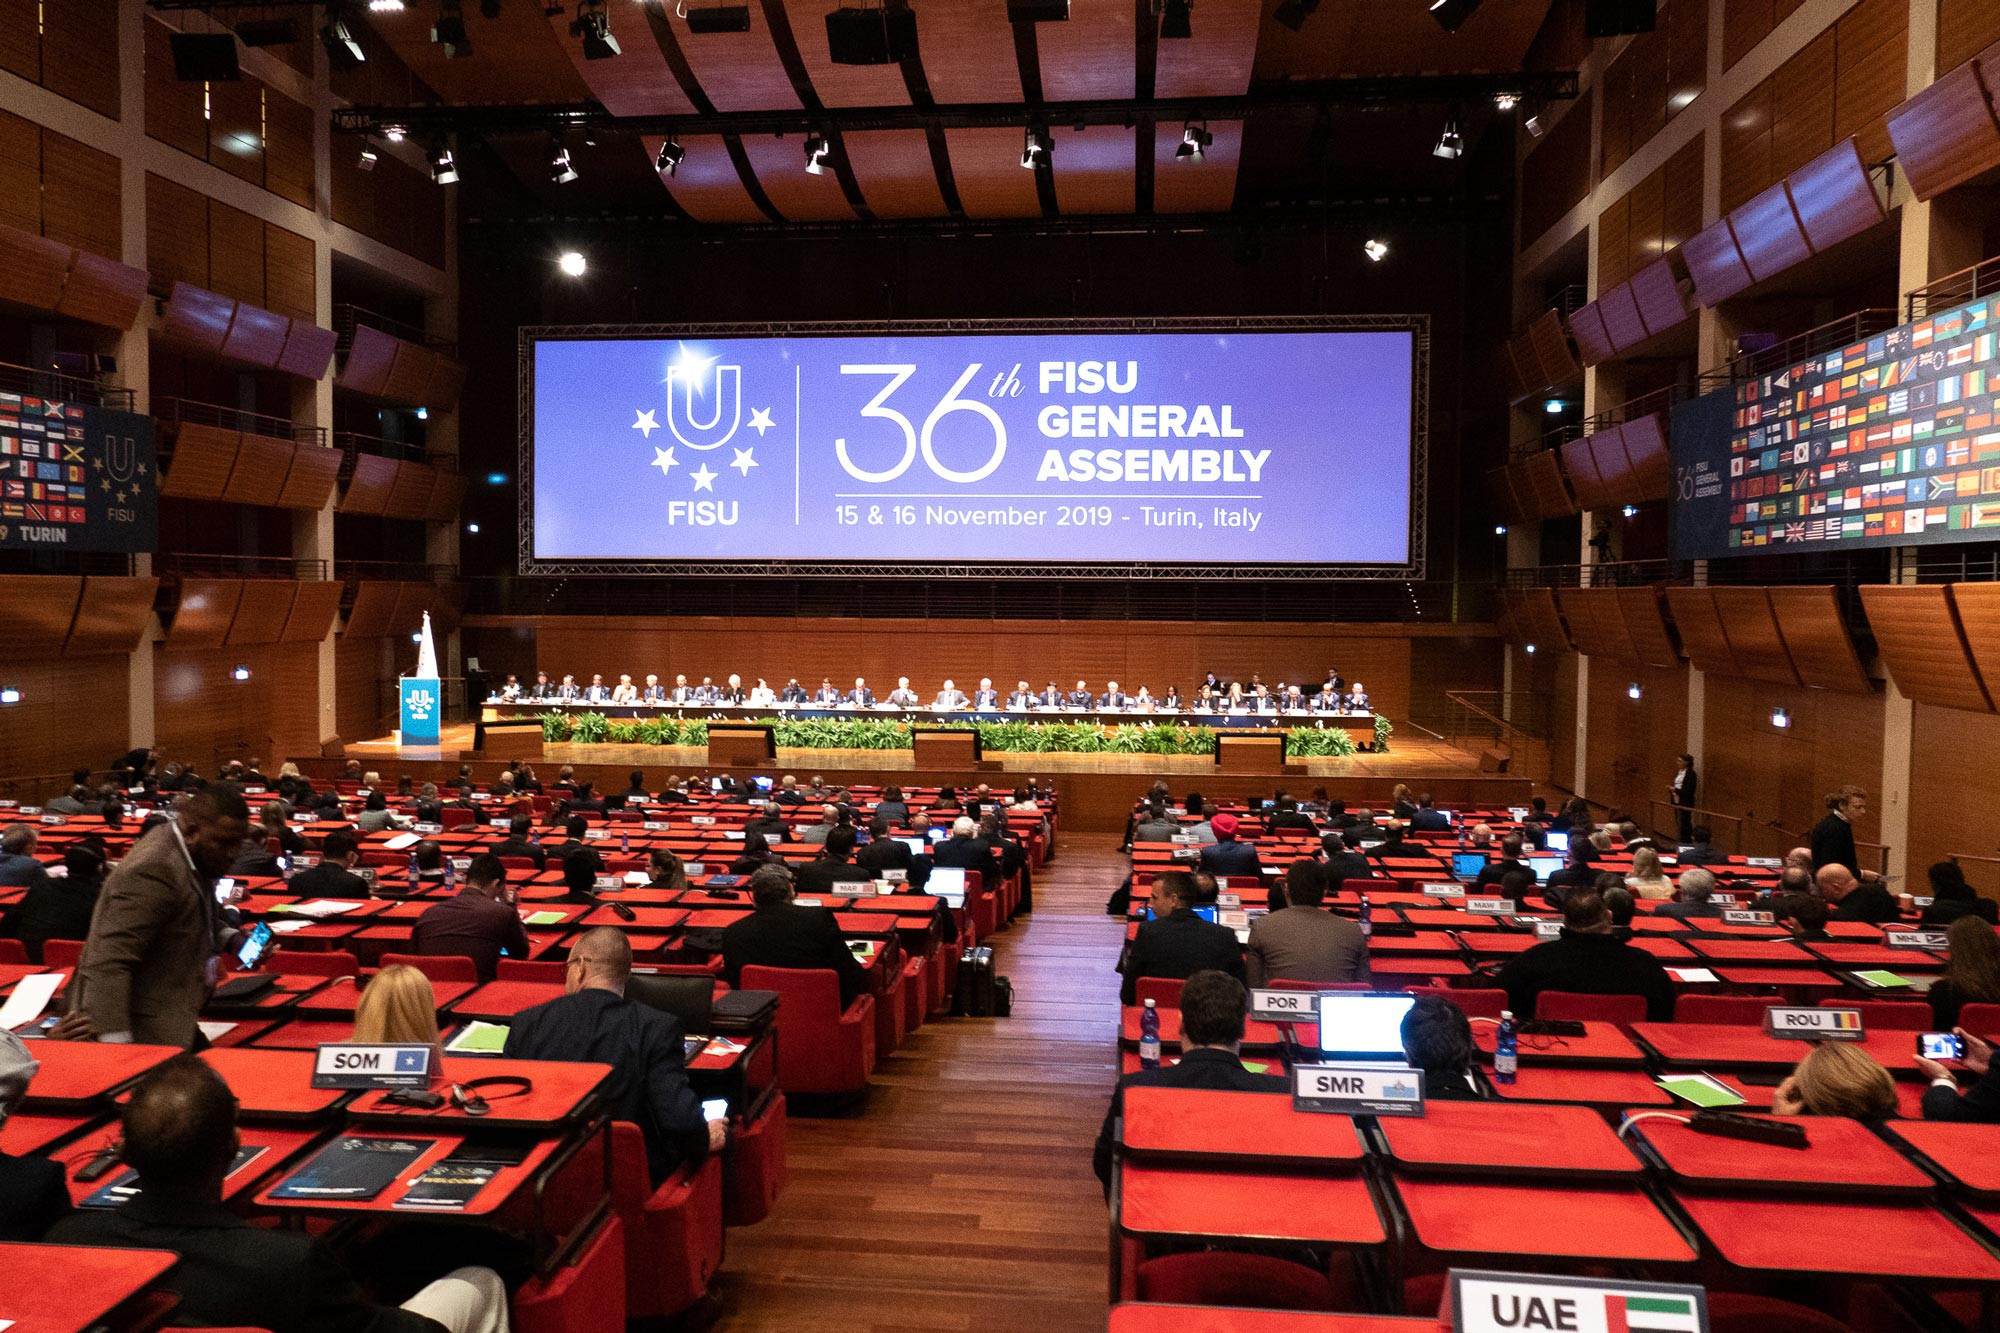 The General Assembly took place in the Lingotto Congress Center in Turin, which is part of the old Fiat factory ©FISU